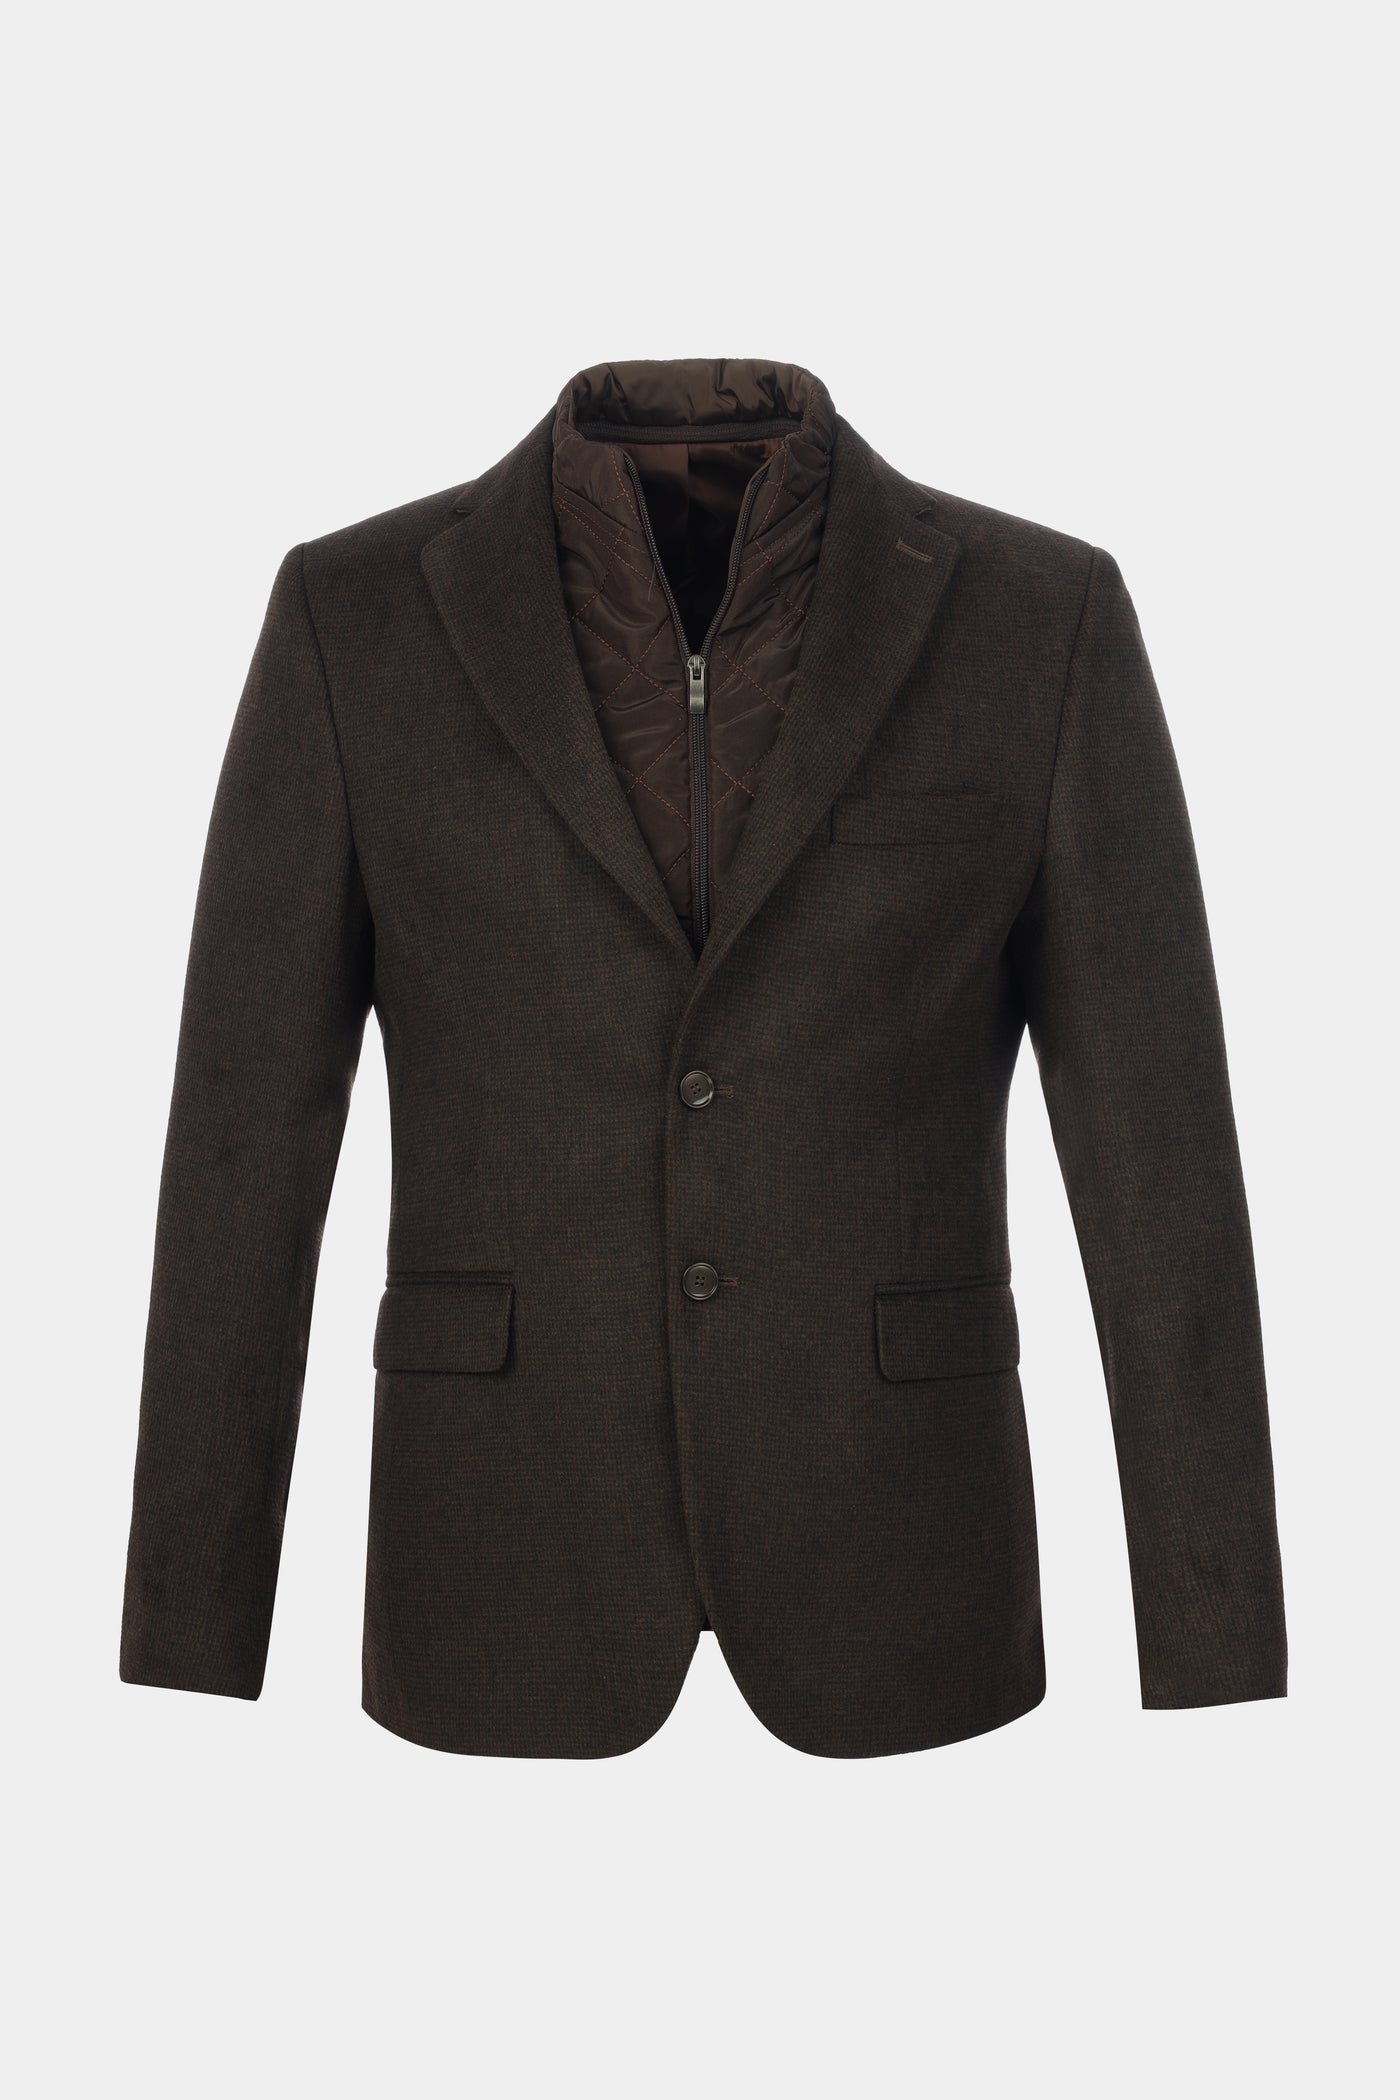 Woven Drak Brown & Black Blazer with removable padded piece